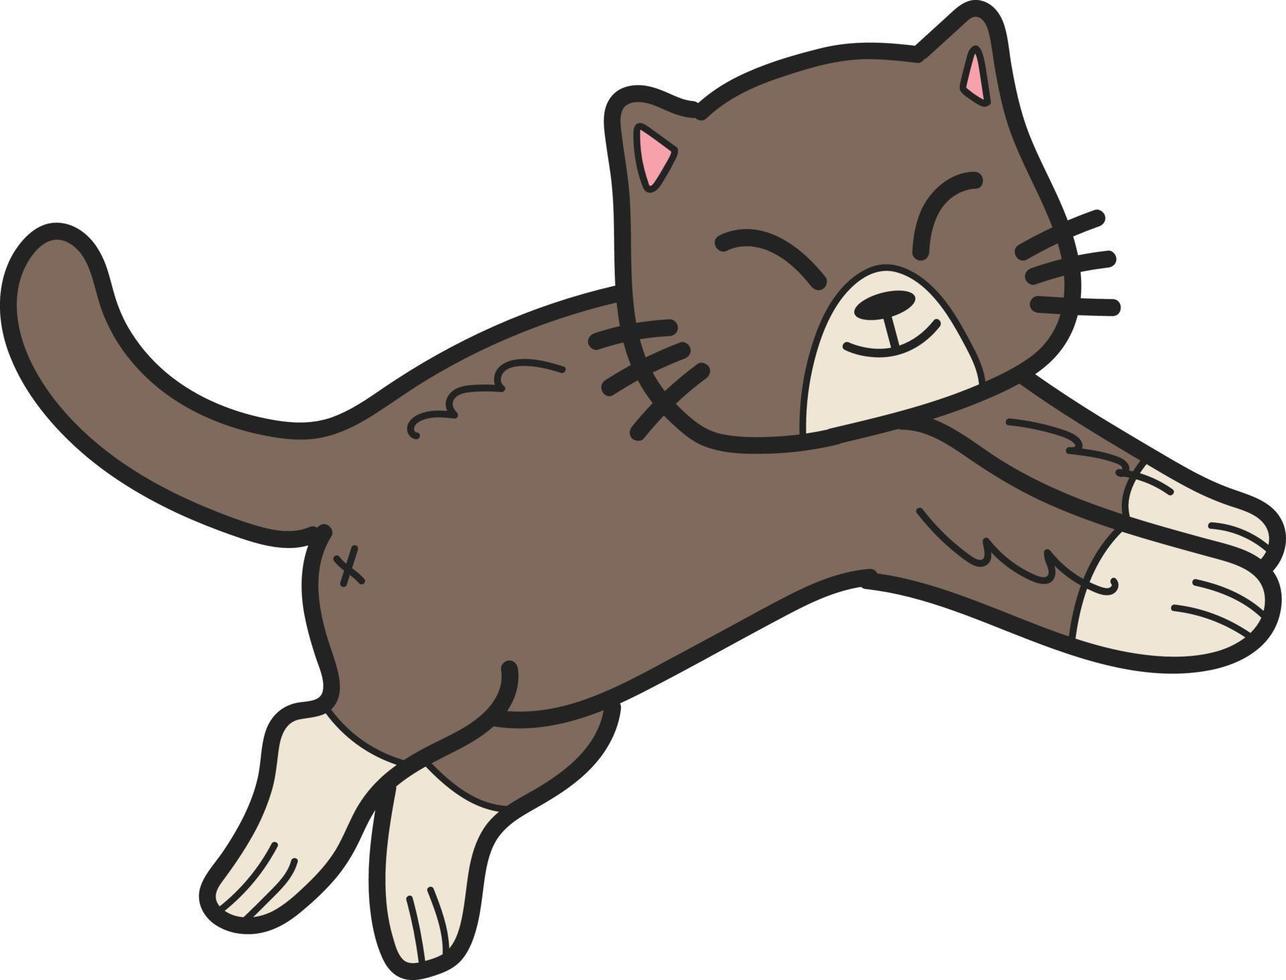 Hand Drawn jumping cat illustration in doodle style vector